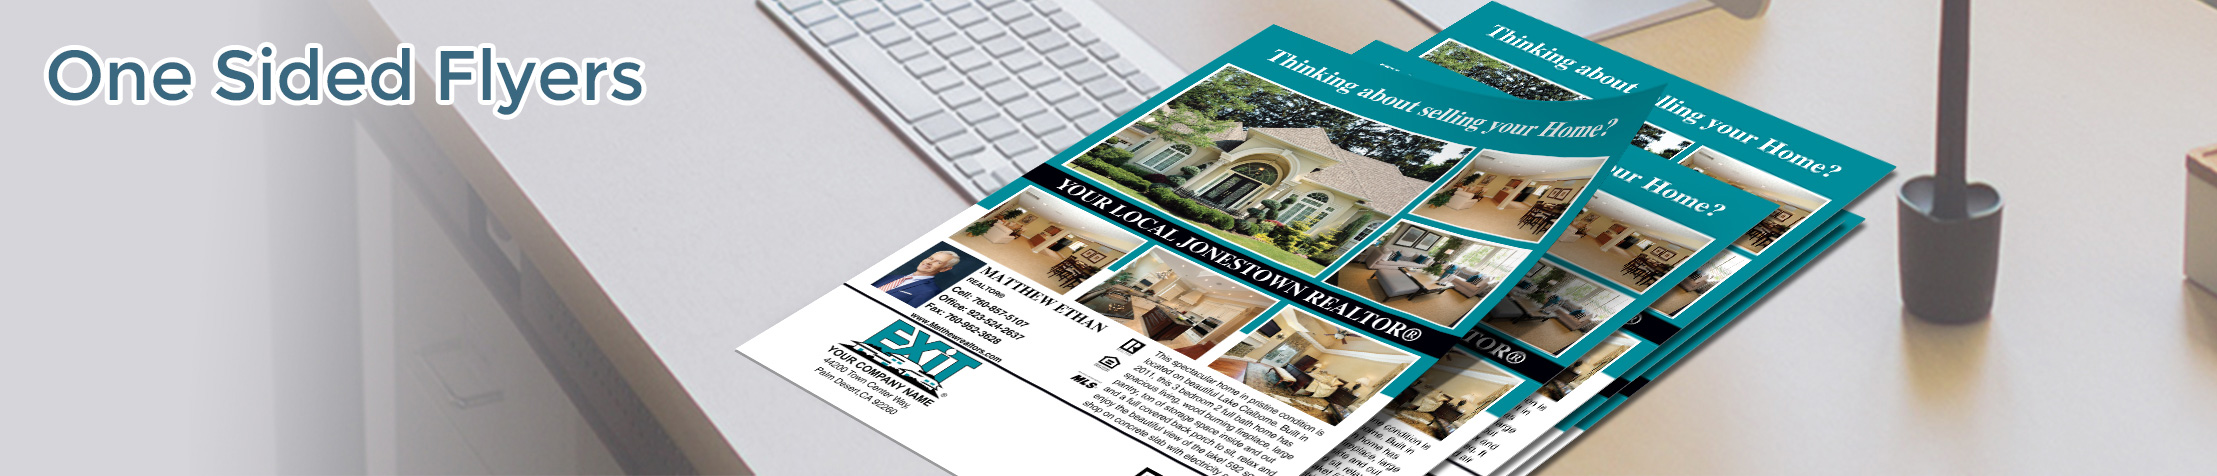 Exit Realty Real Estate Flyers and Brochures - Exit Realty approved vendor one-sided flyer templates for open houses and marketing | BestPrintBuy.com